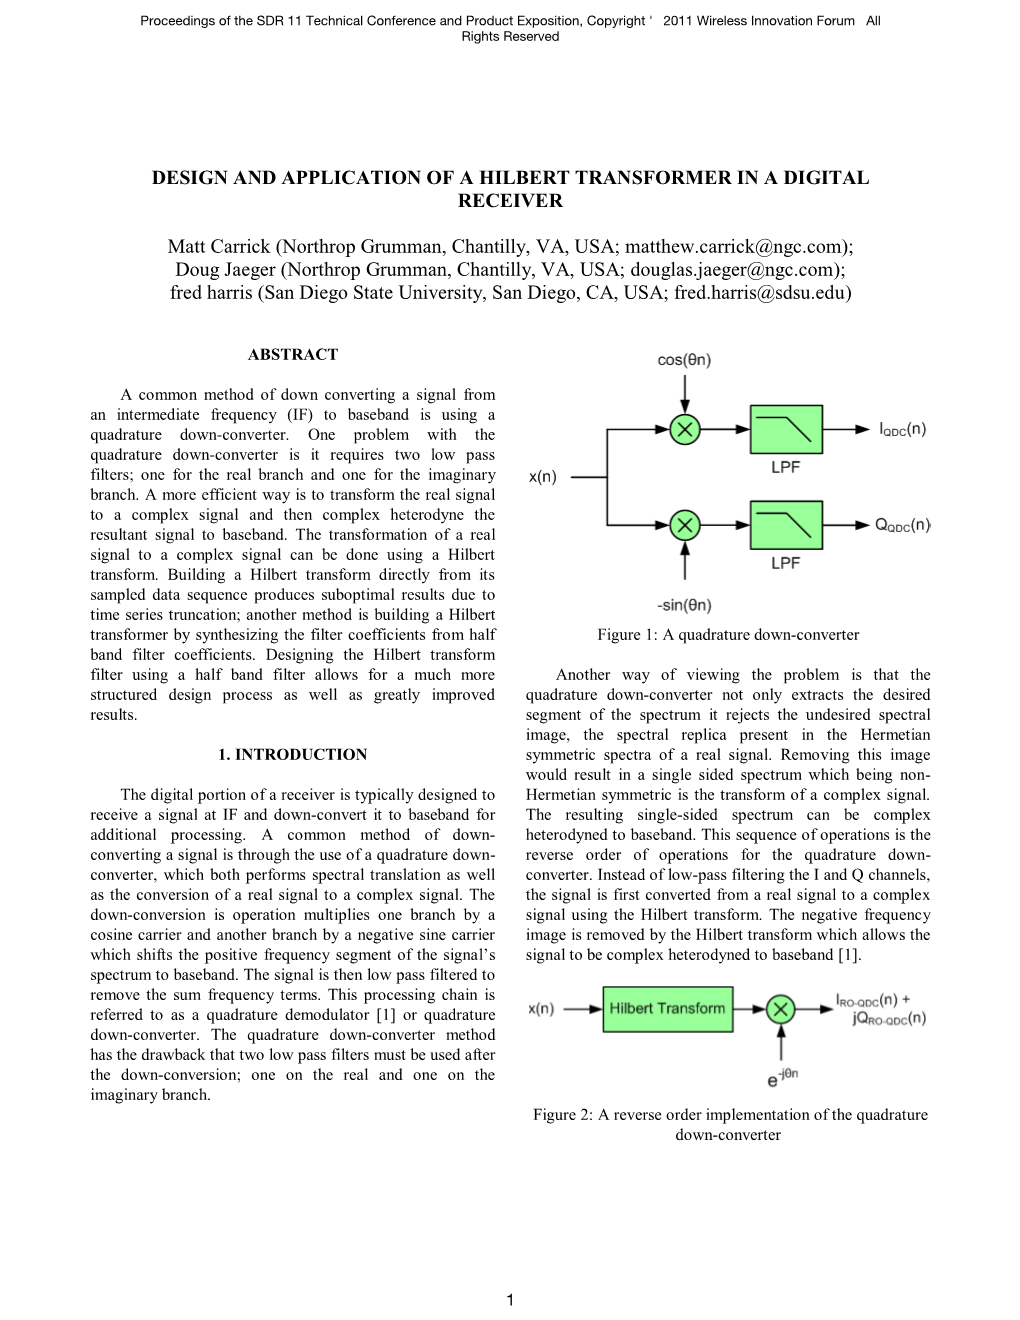 Design and Application of a Hilbert Transformer in a Digital Receiver